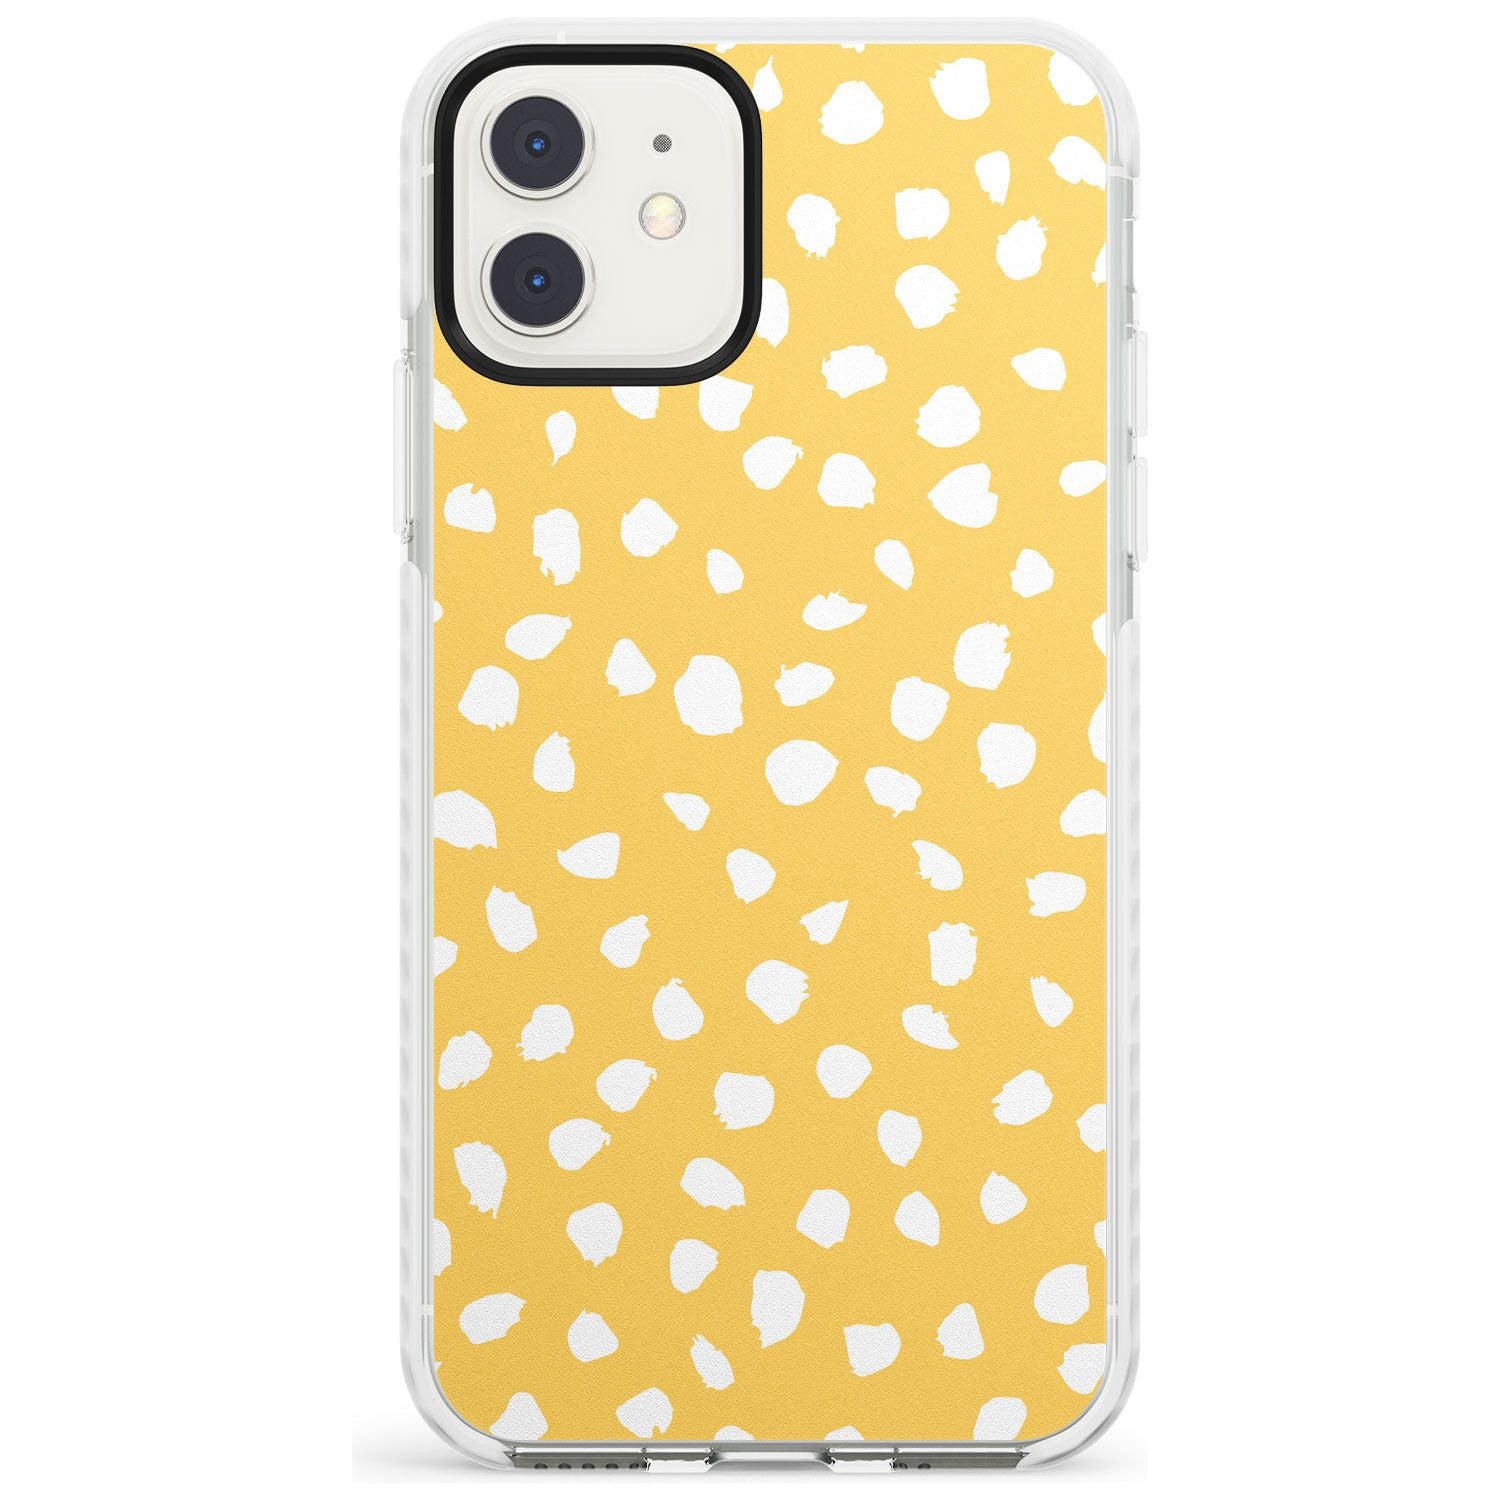 White on Yellow Dalmatian Polka Dot Spots Impact Phone Case for iPhone 11